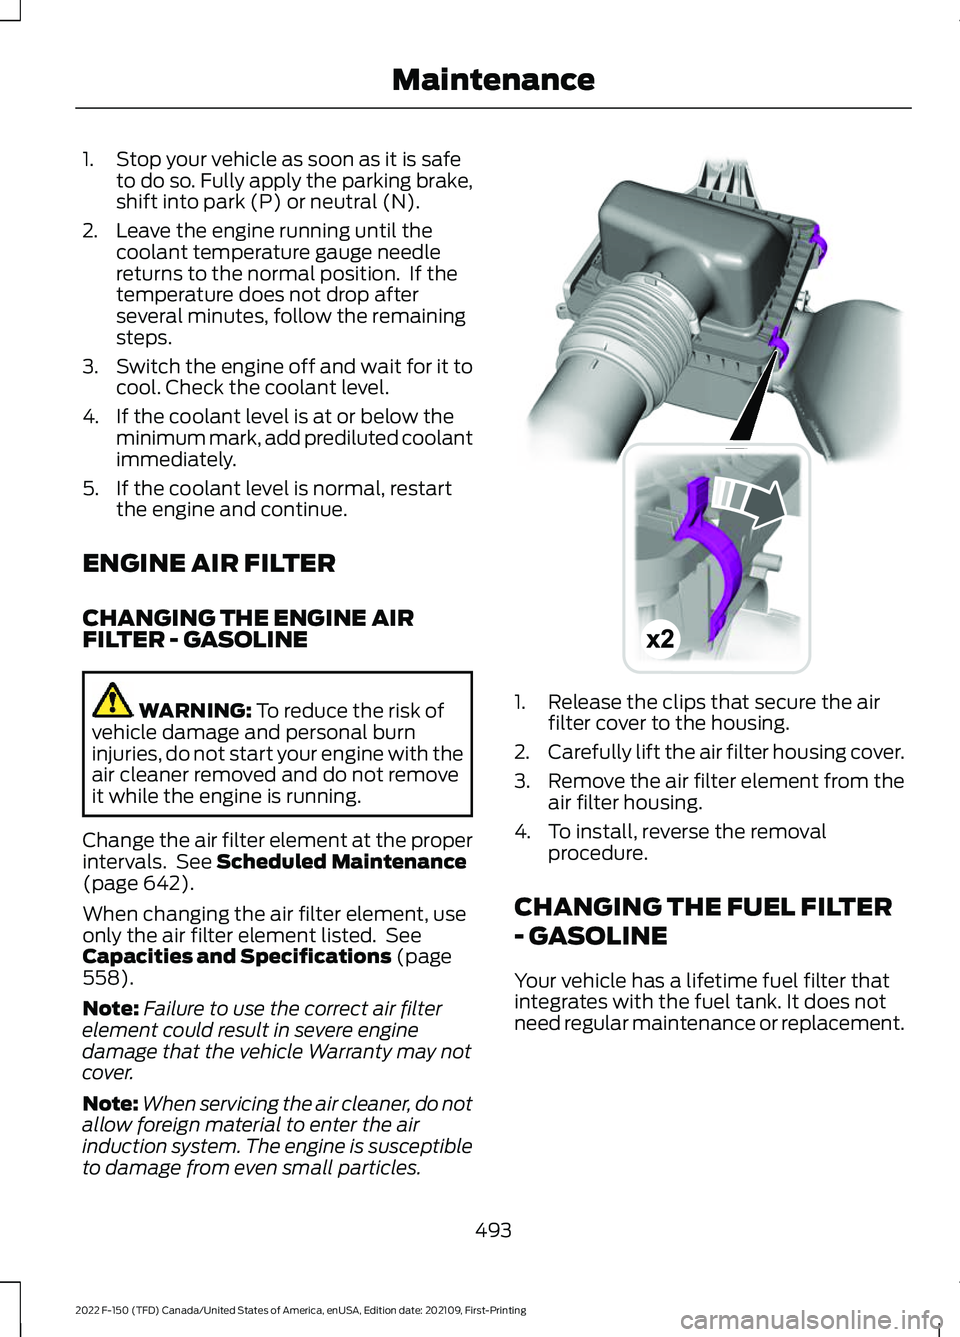 FORD F-150 2022 Service Manual 1. Stop your vehicle as soon as it is safe
to do so. Fully apply the parking brake,
shift into park (P) or neutral (N).
2. Leave the engine running until the coolant temperature gauge needle
returns t